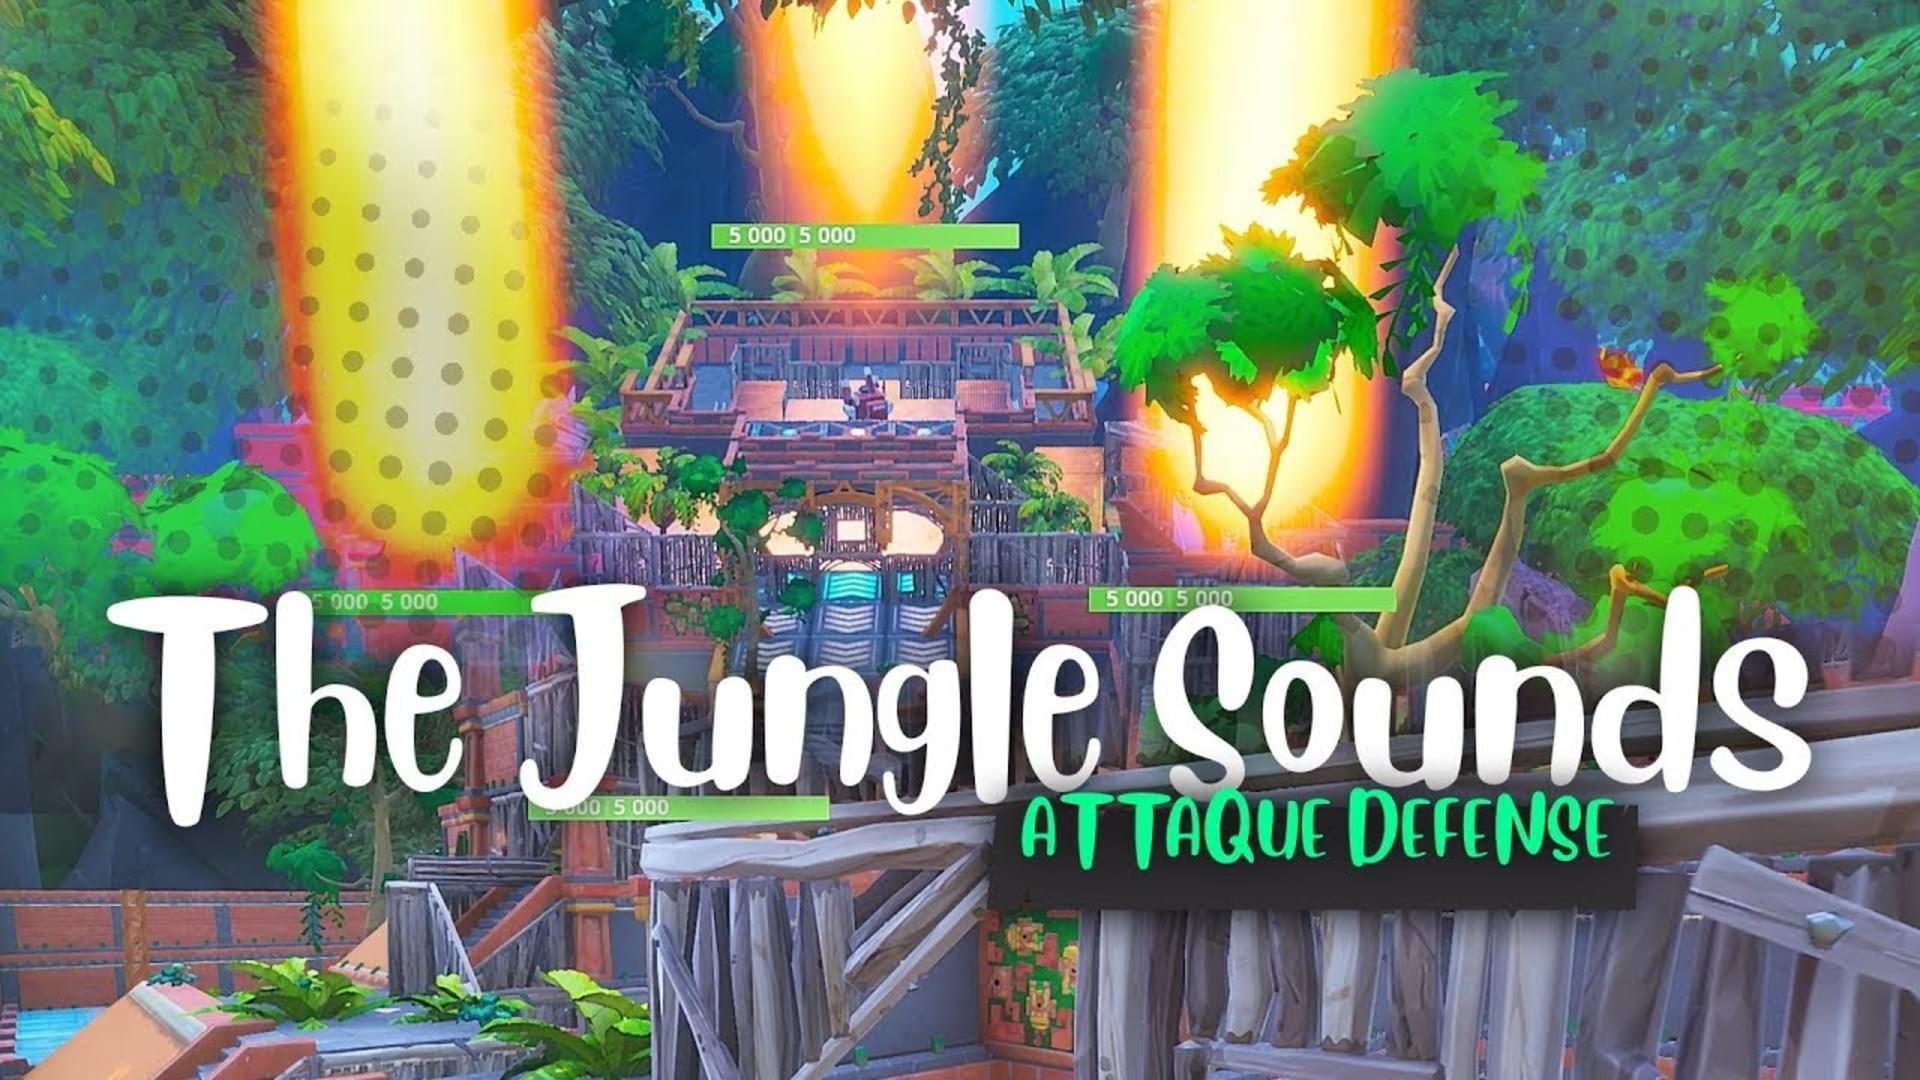 attack defend the jungle sounds - fortnite chutes and ladders